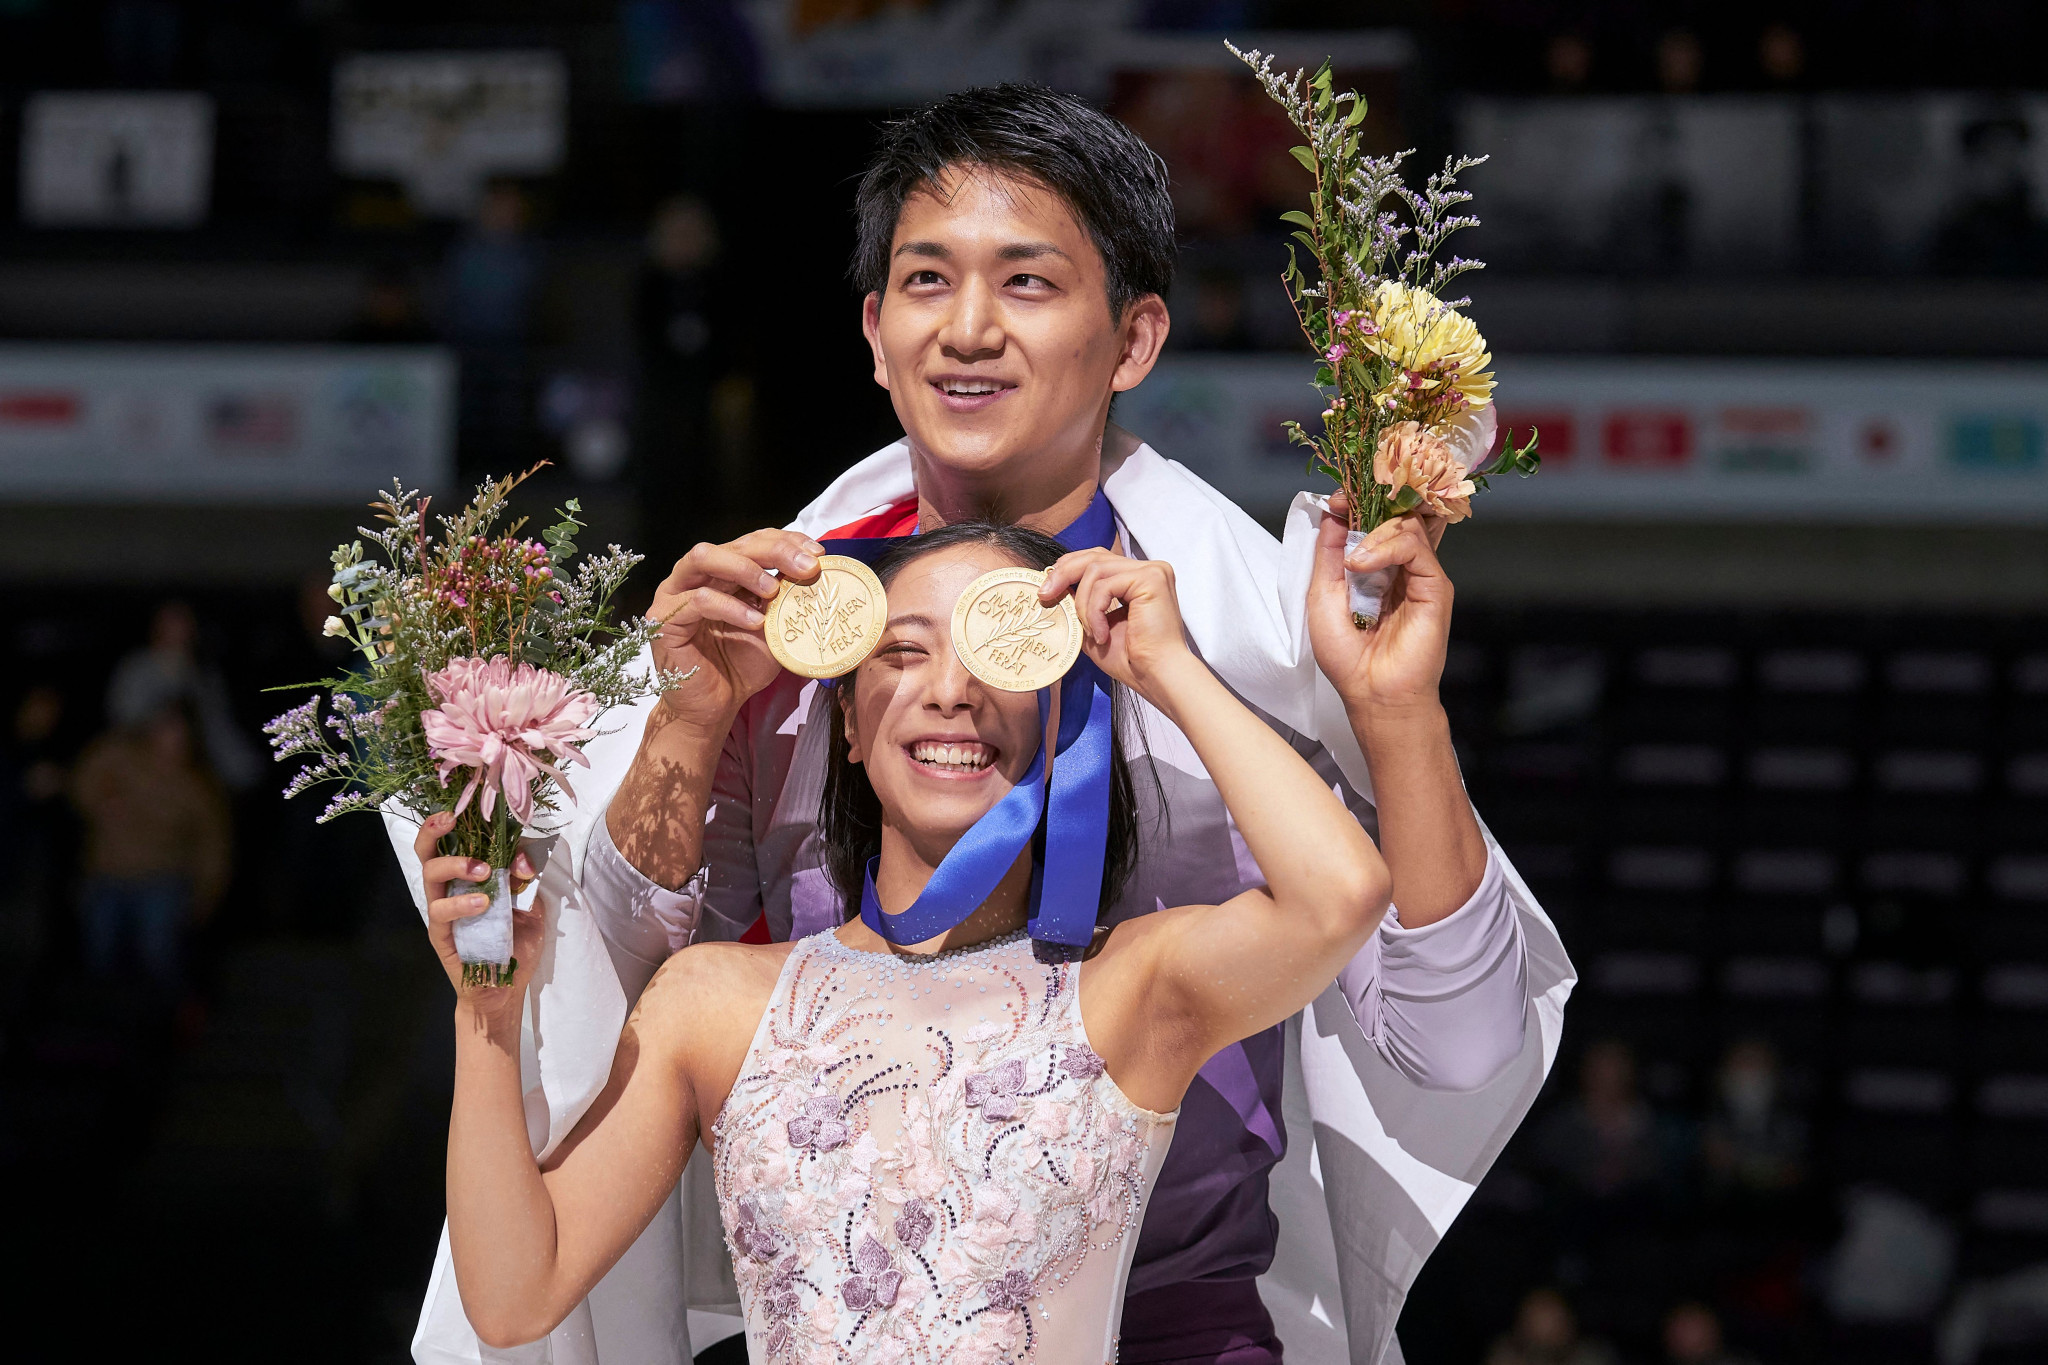  Riku Miura and Ryuichi Kihara made history by winning the first pair skating title for their country at an ISU event ©Getty Images